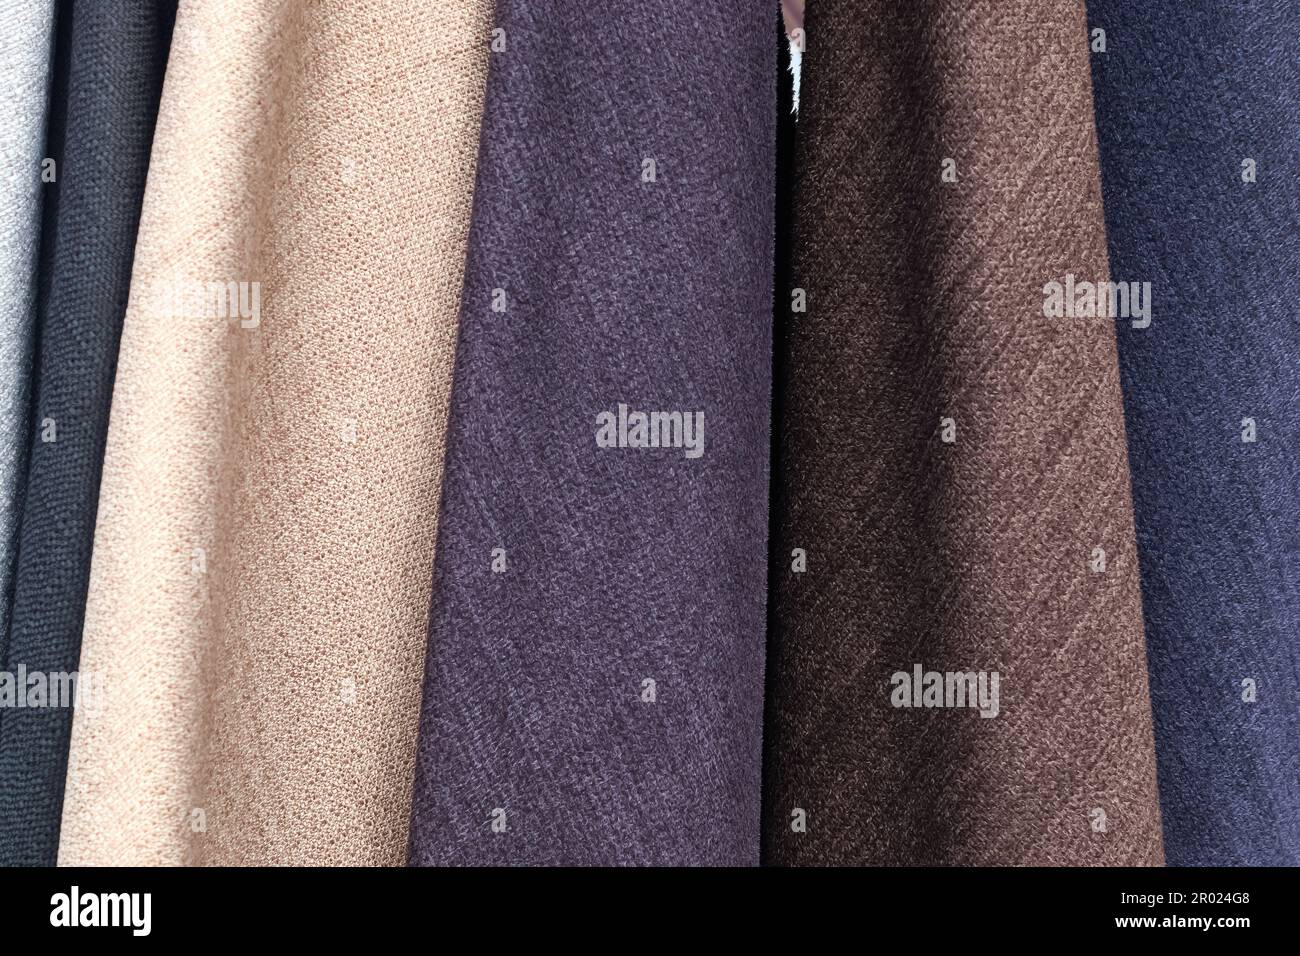 Detailed close up view on samples of cloth and fabrics in different colors found at a fabrics market. Stock Photo